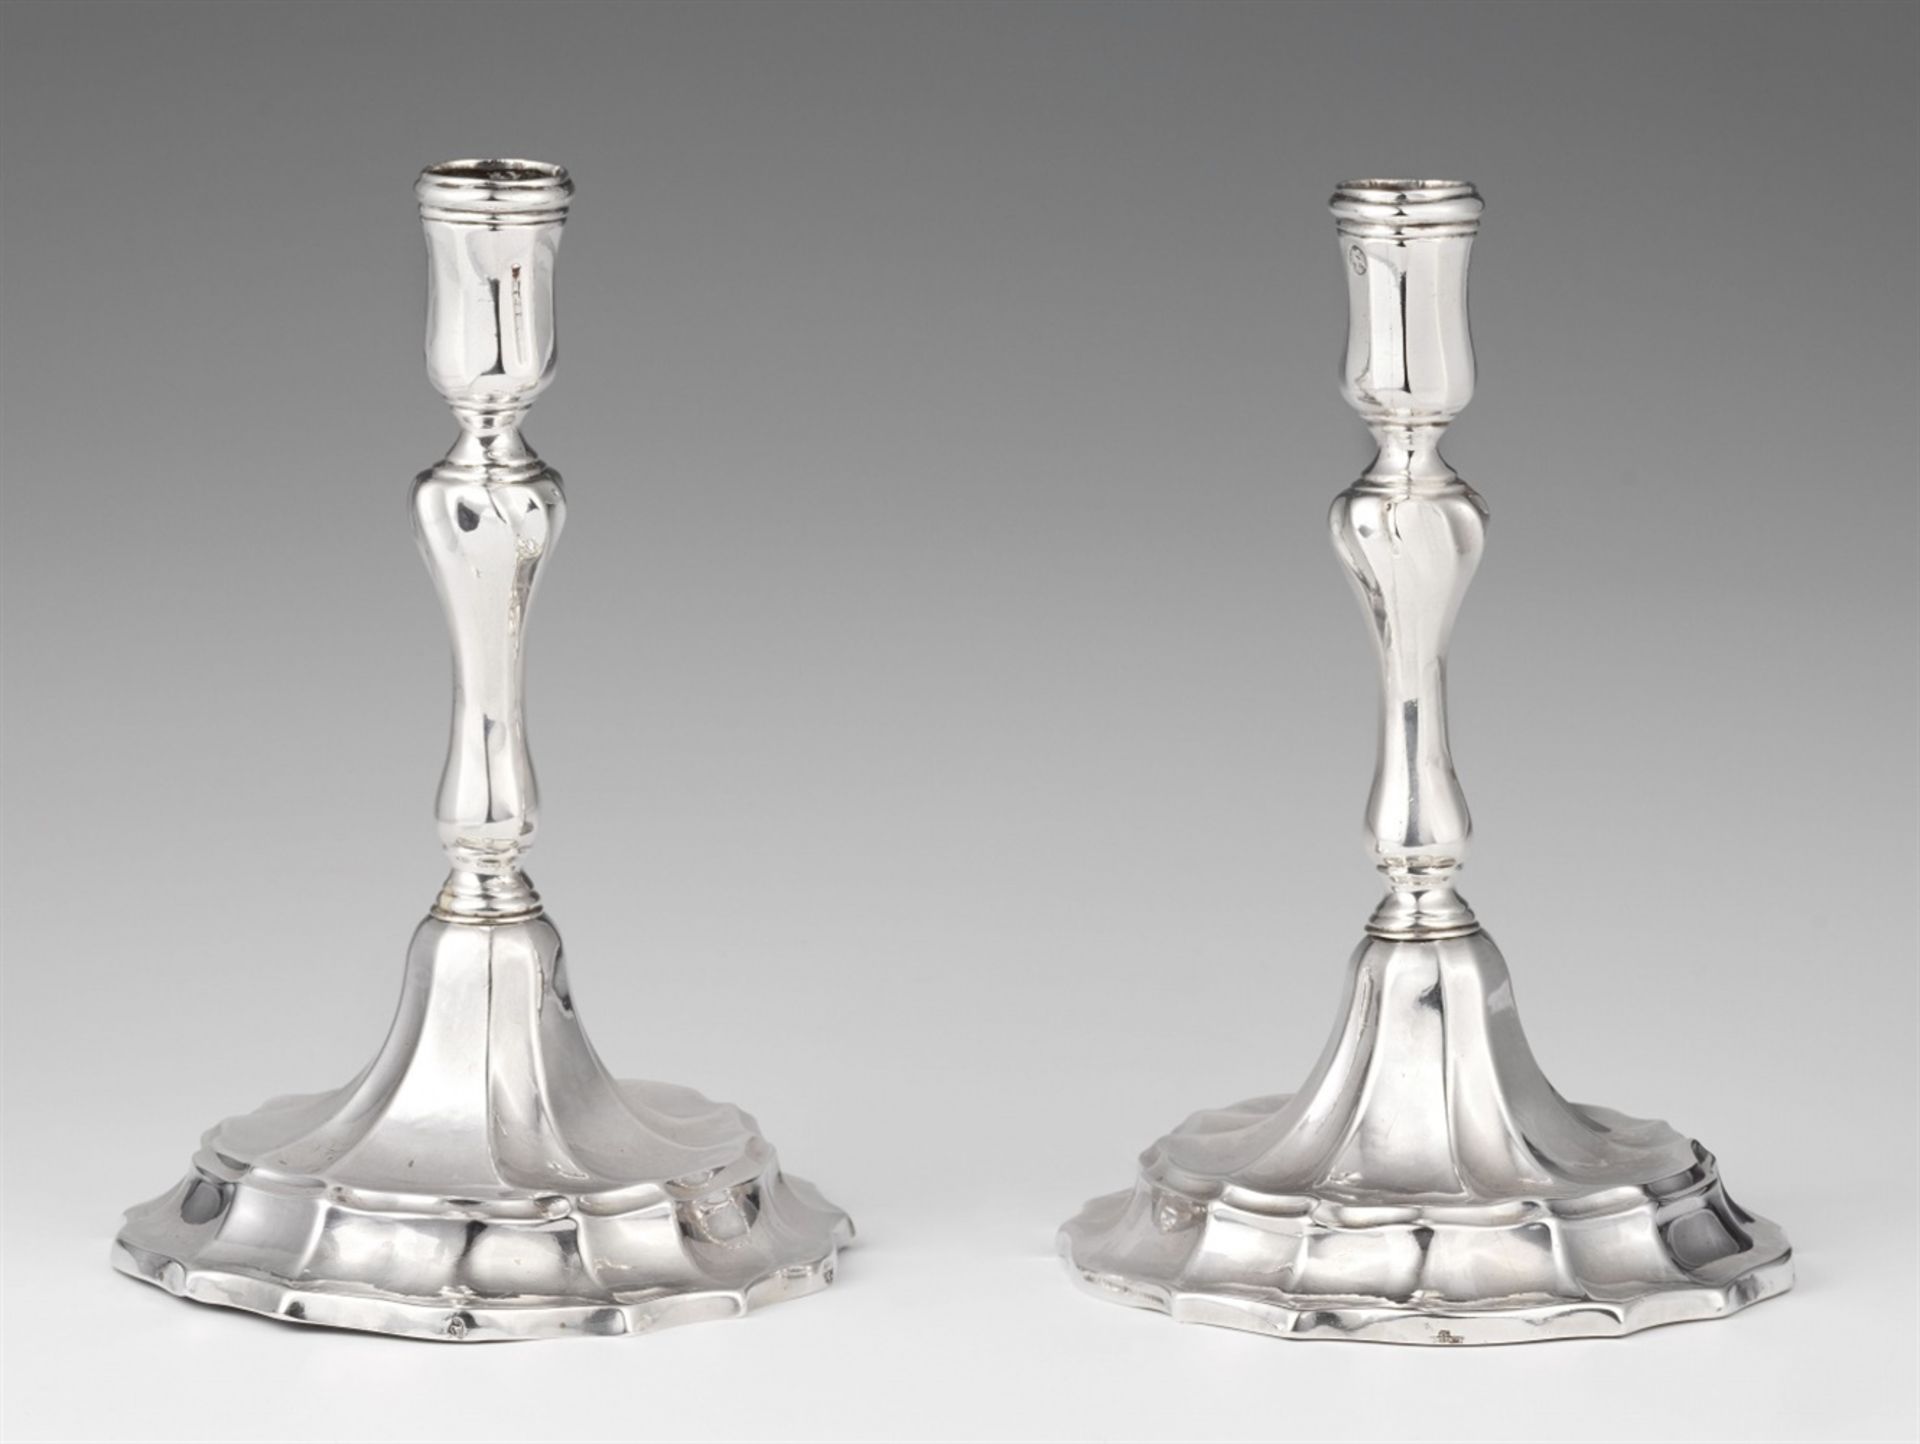 A pair of Spanish silver candlesticksBaluster-form twist fluted shafts issuing from round bases. H